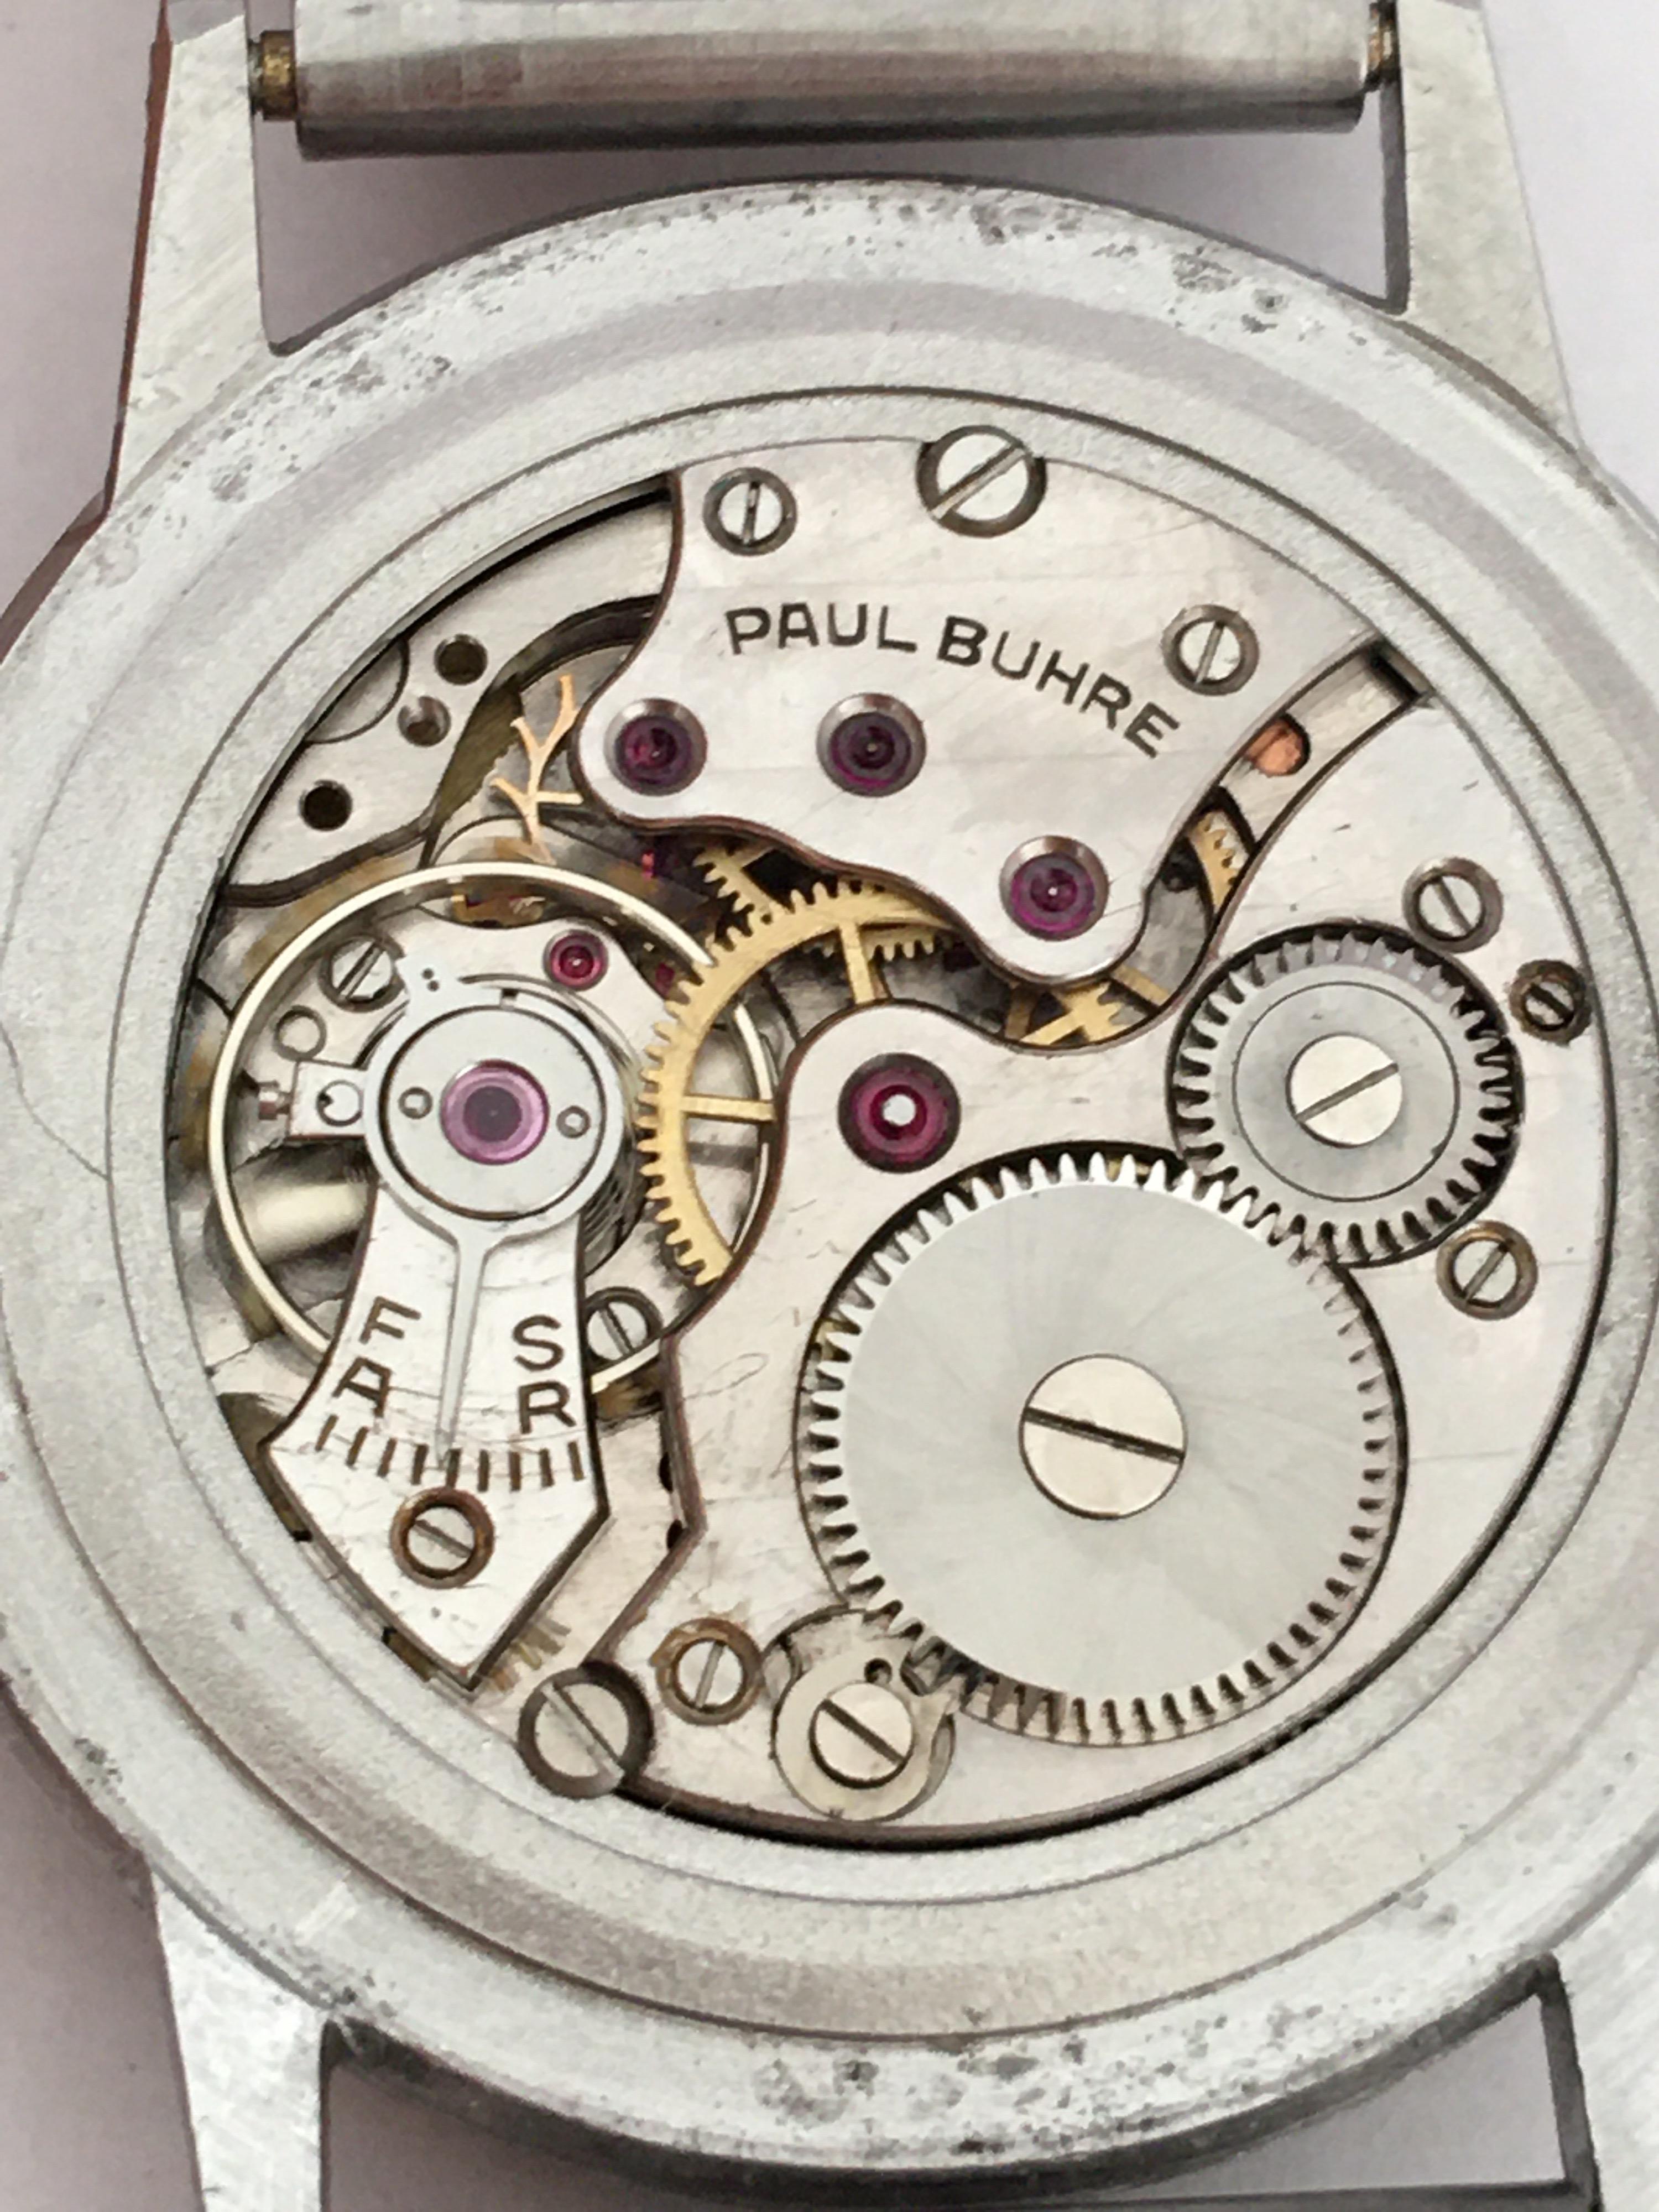 1960s Stainless Steel Manual Winding Paul Buhre Vintage Watch For Sale 2